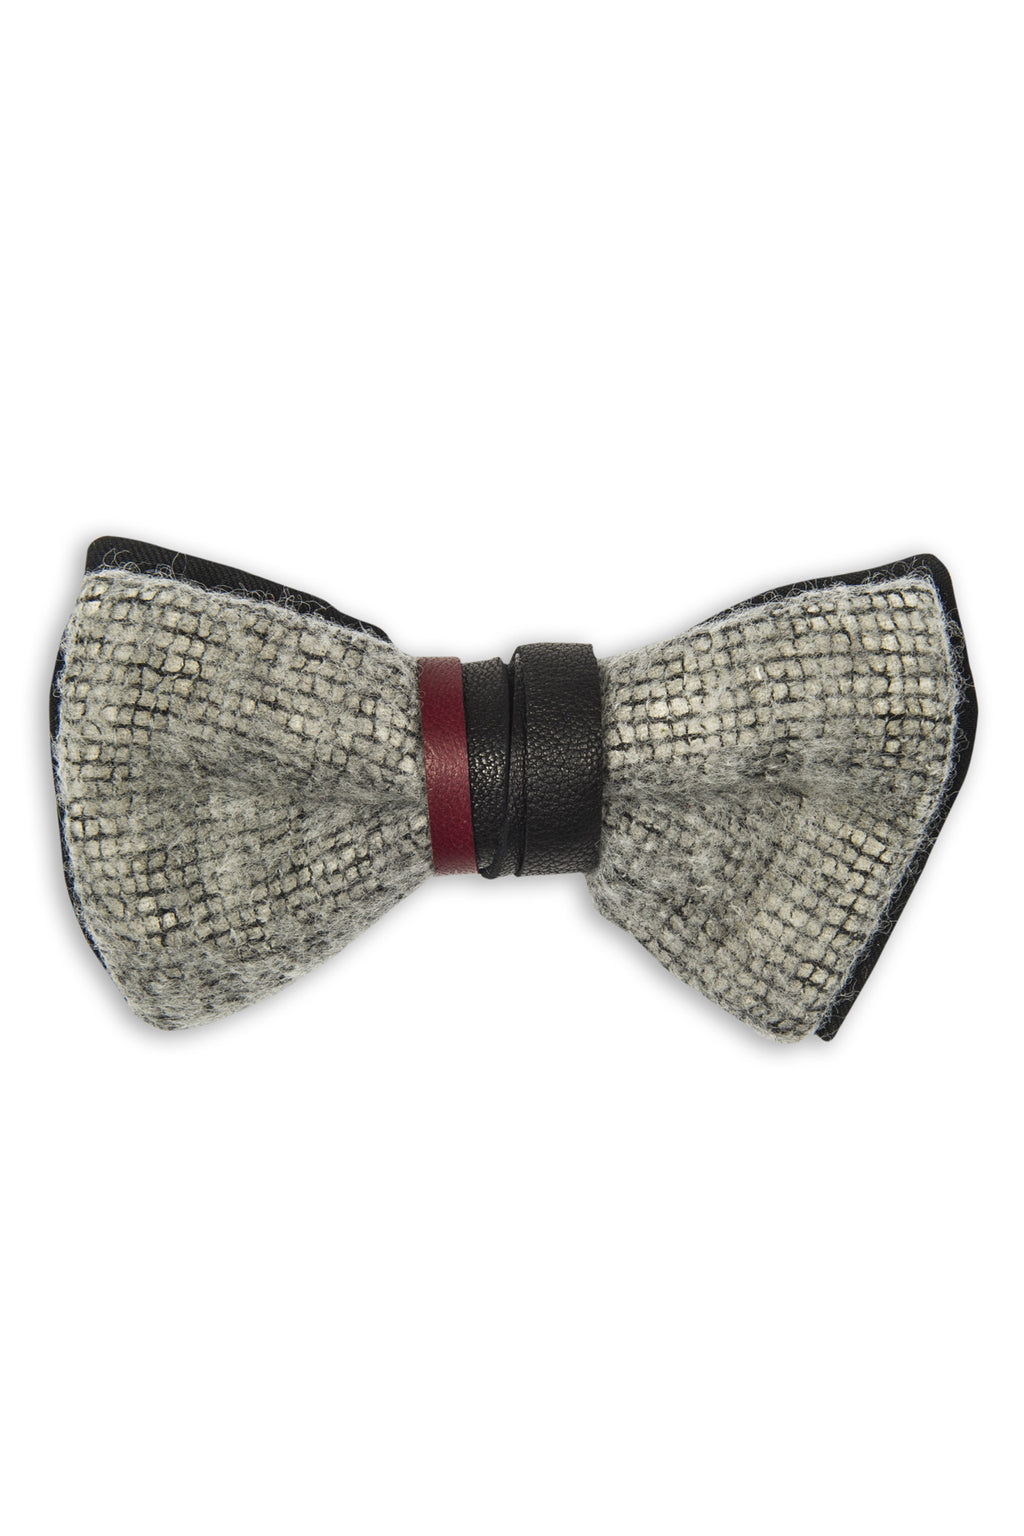 Handmade imported mohair bow tie with leather - Noeud papillon mohair importé et cuir